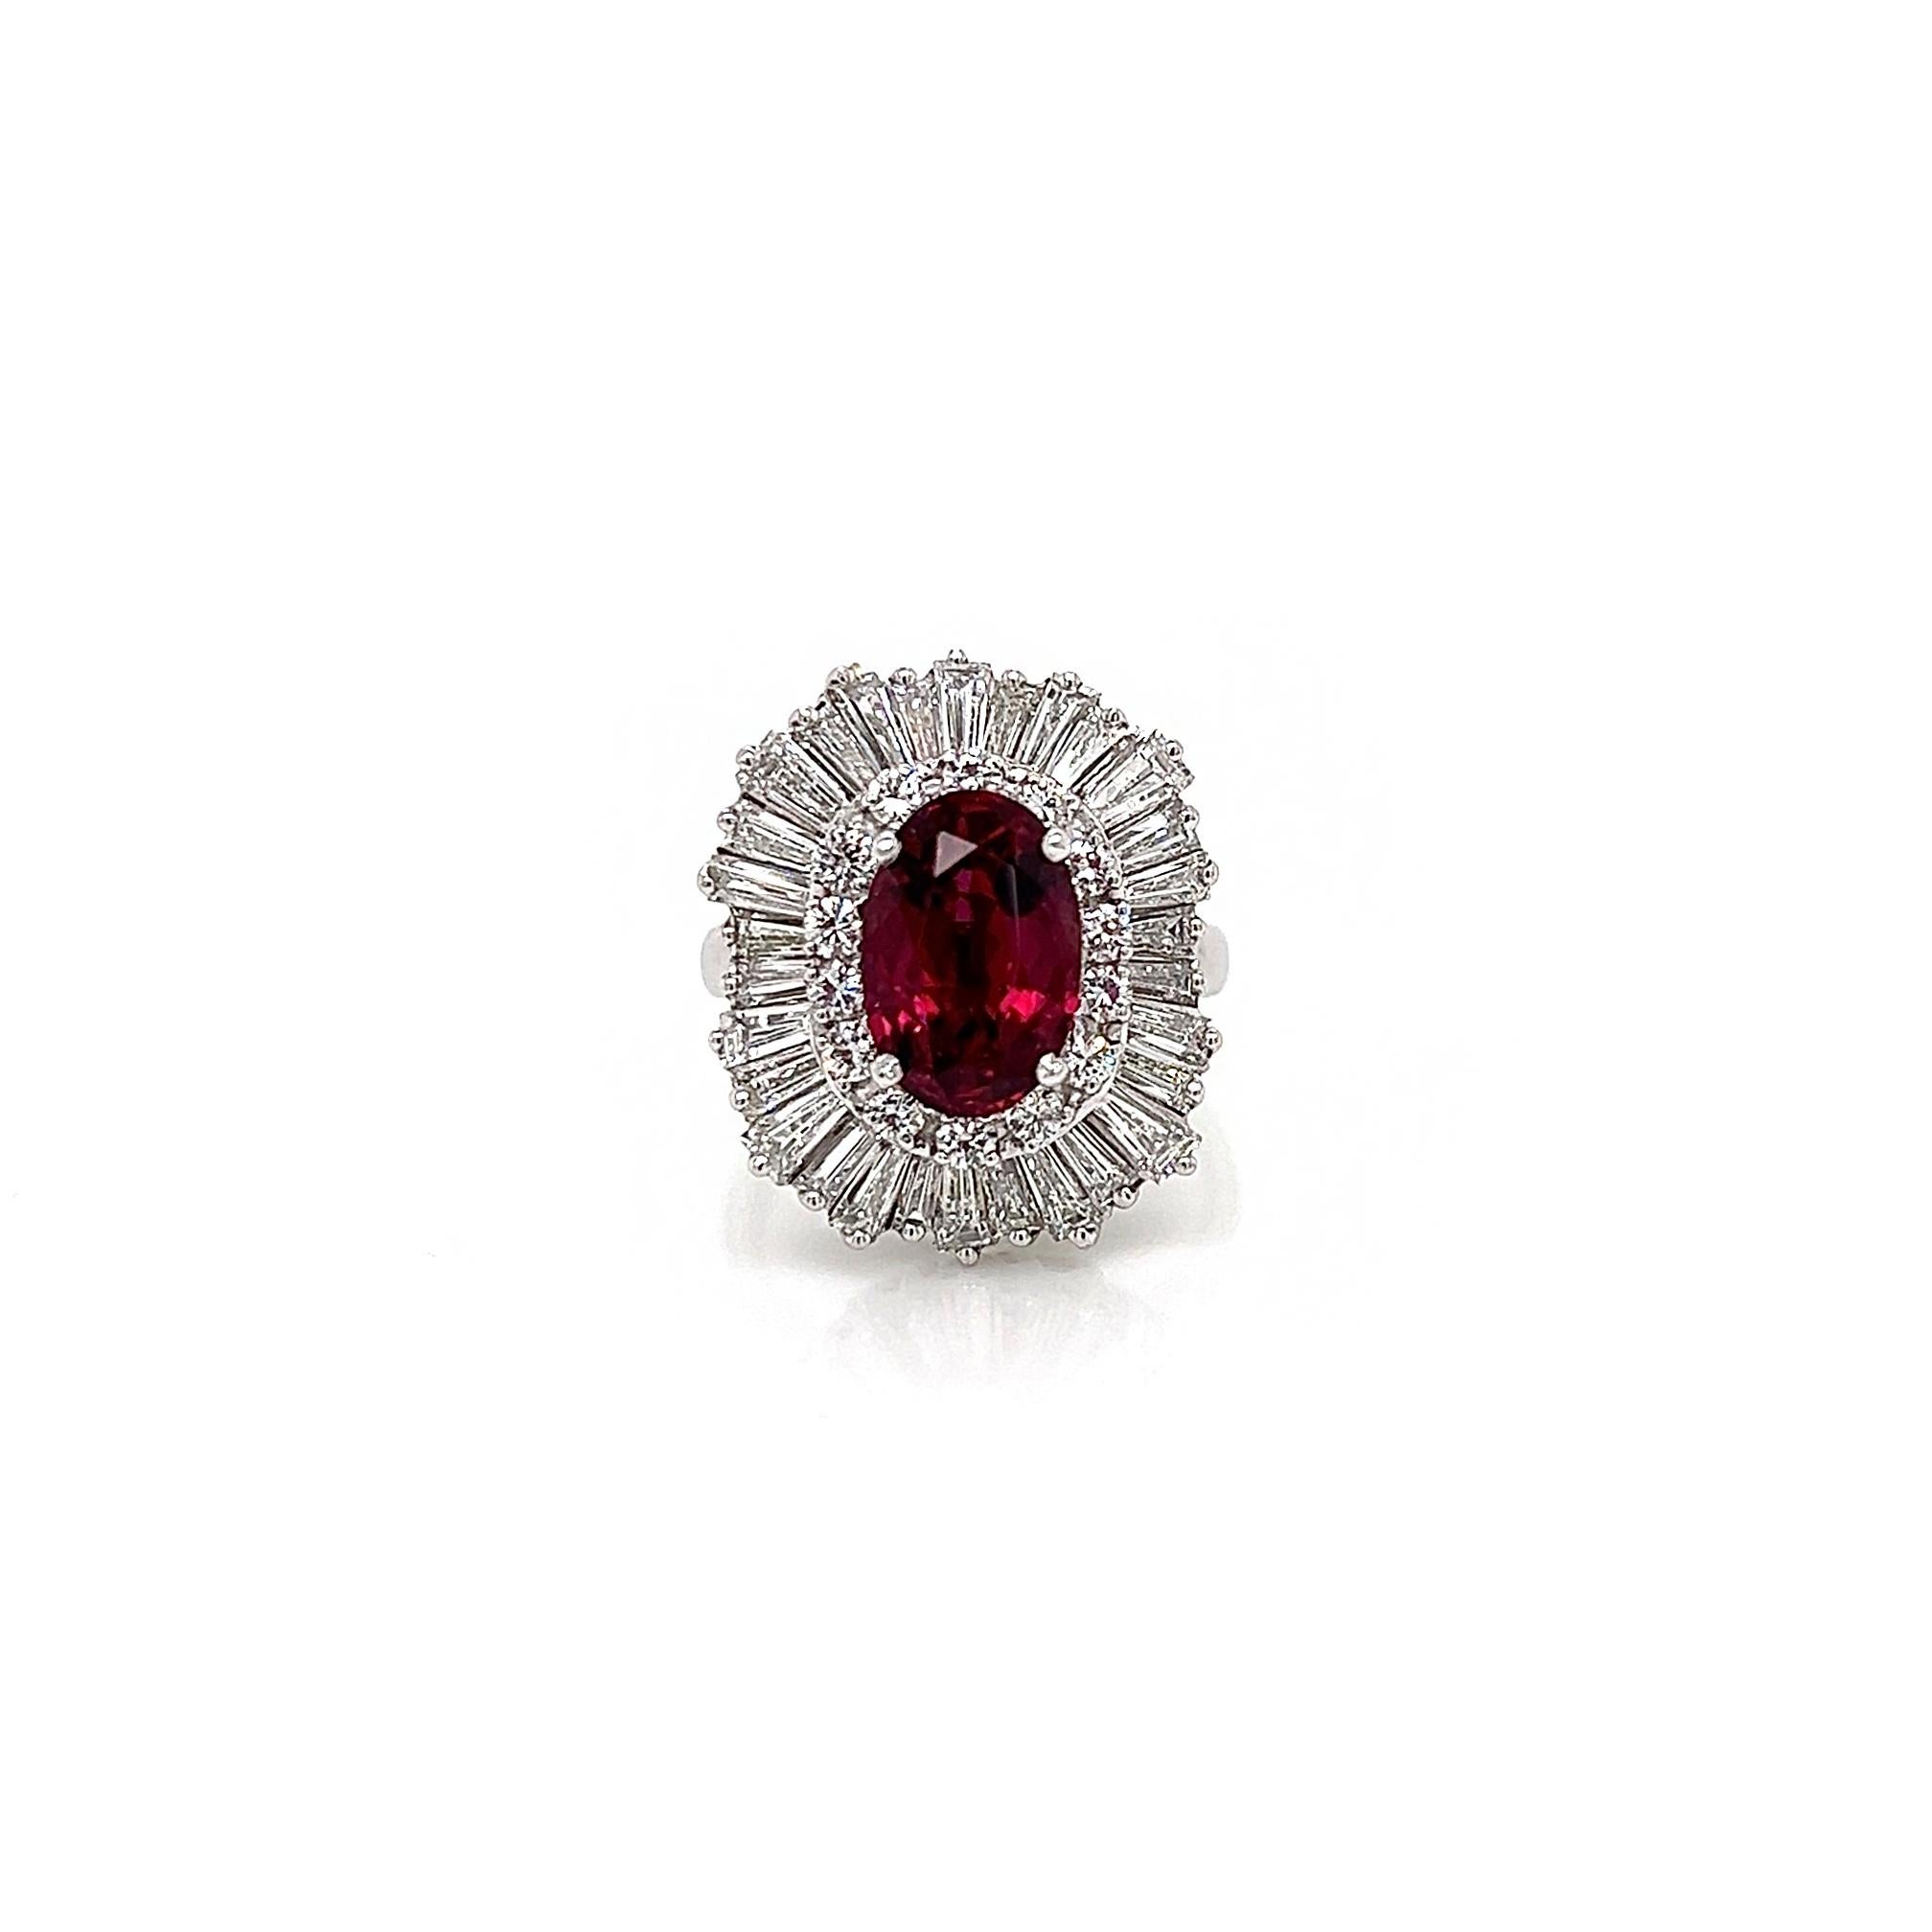 5.79 Total Carat Ruby and Diamond Ladies Ring

-Metal Type: Platinum
-2.54 Carat Oval Cut Natural Ruby
-3.25 Carat Round and Baguette Cut Natural side Diamonds. F-G Color, VVS-VS Clarity 

-Size 6.5

Made in New York City.